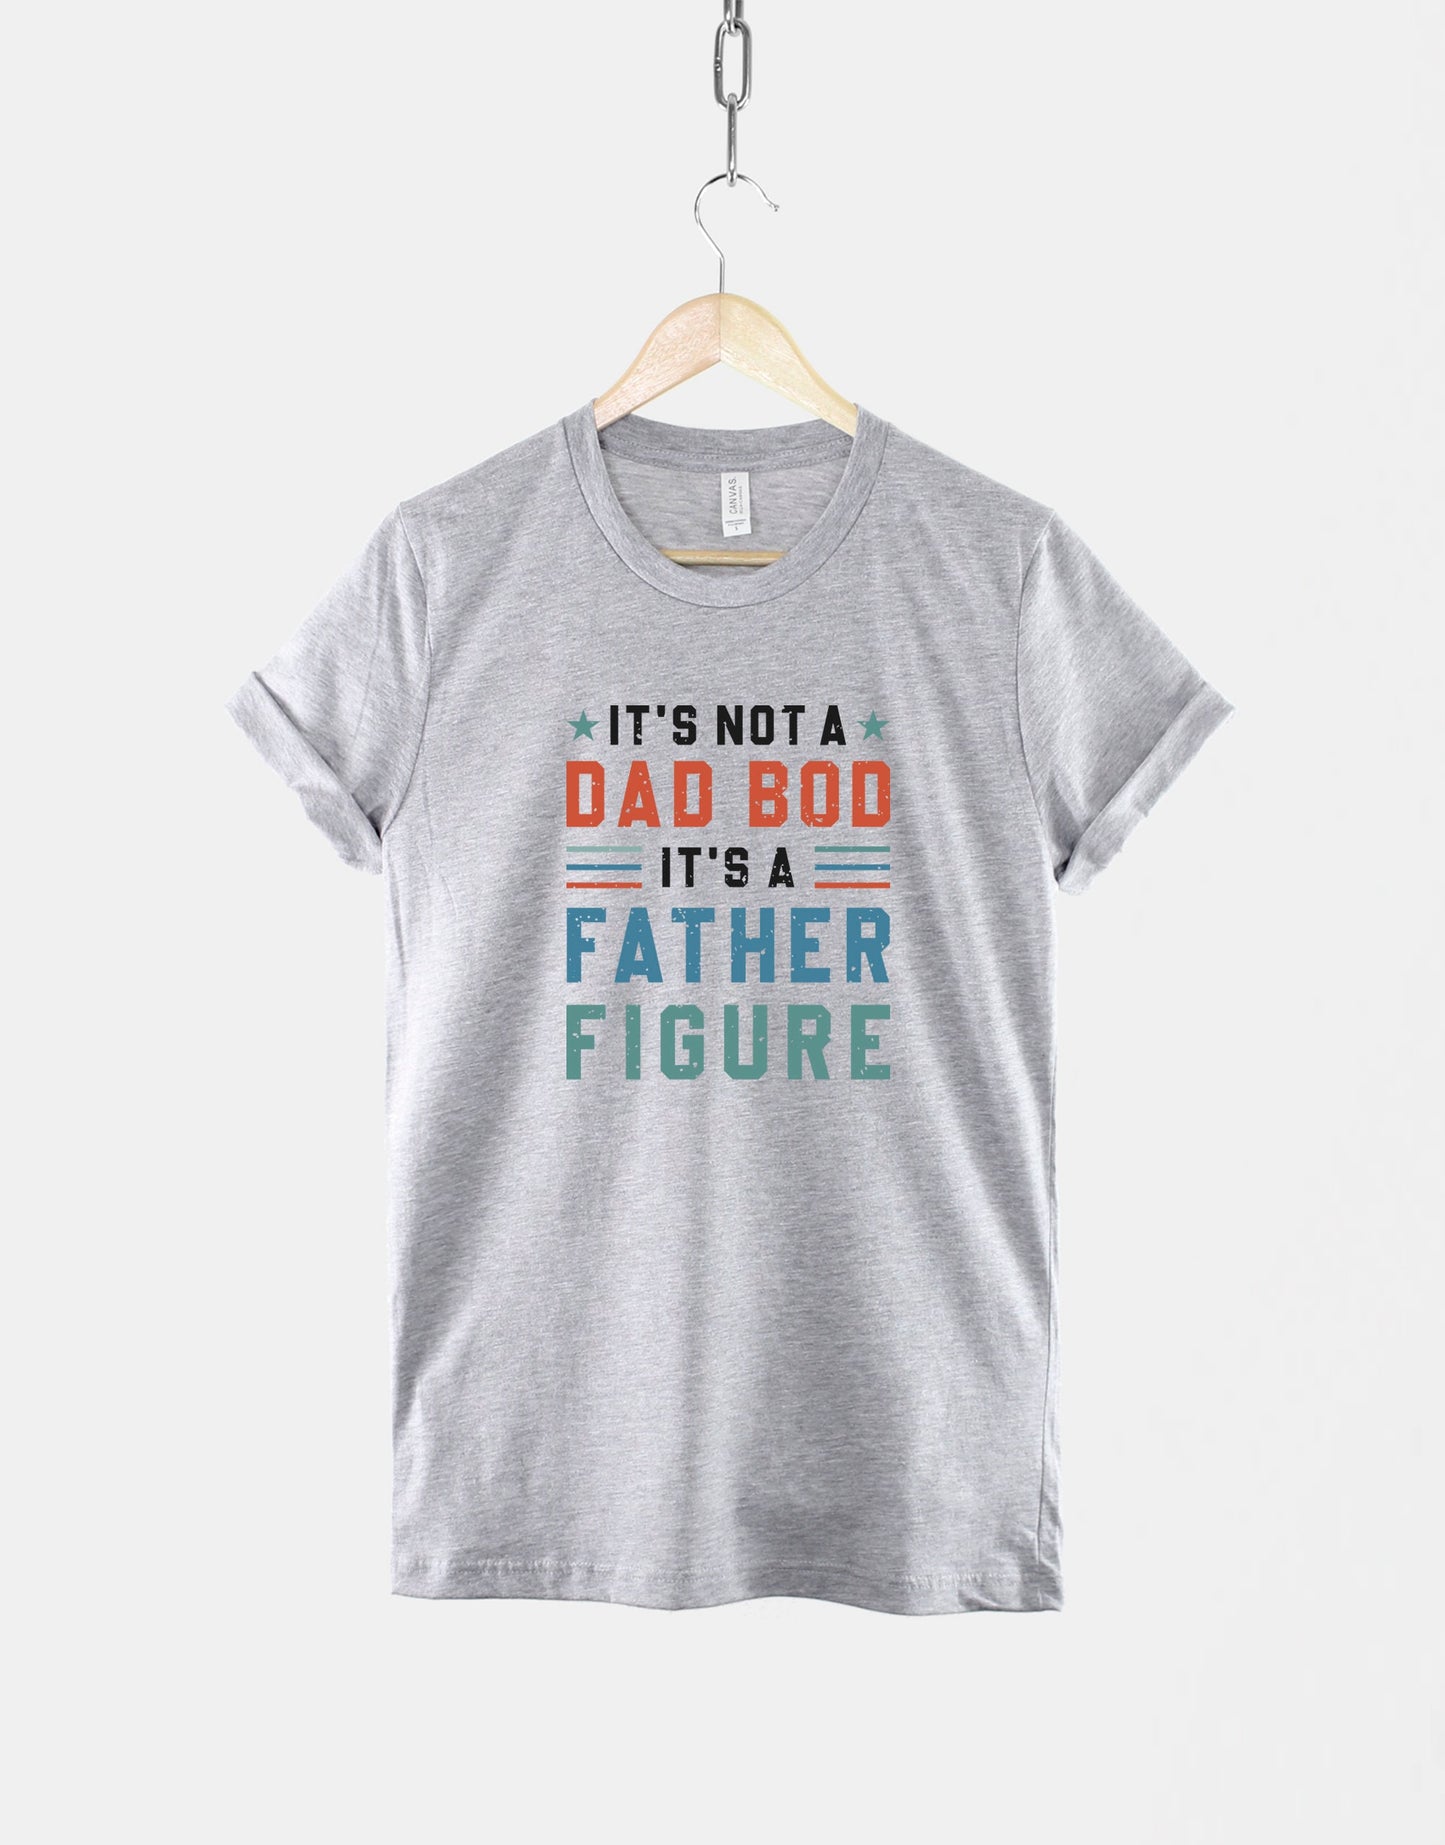 It's Not A Dad Bod It's A Father Figure T-Shirt - Dad Bod T-Shirt - T-Shirt For Dad - Dad T-Shirts